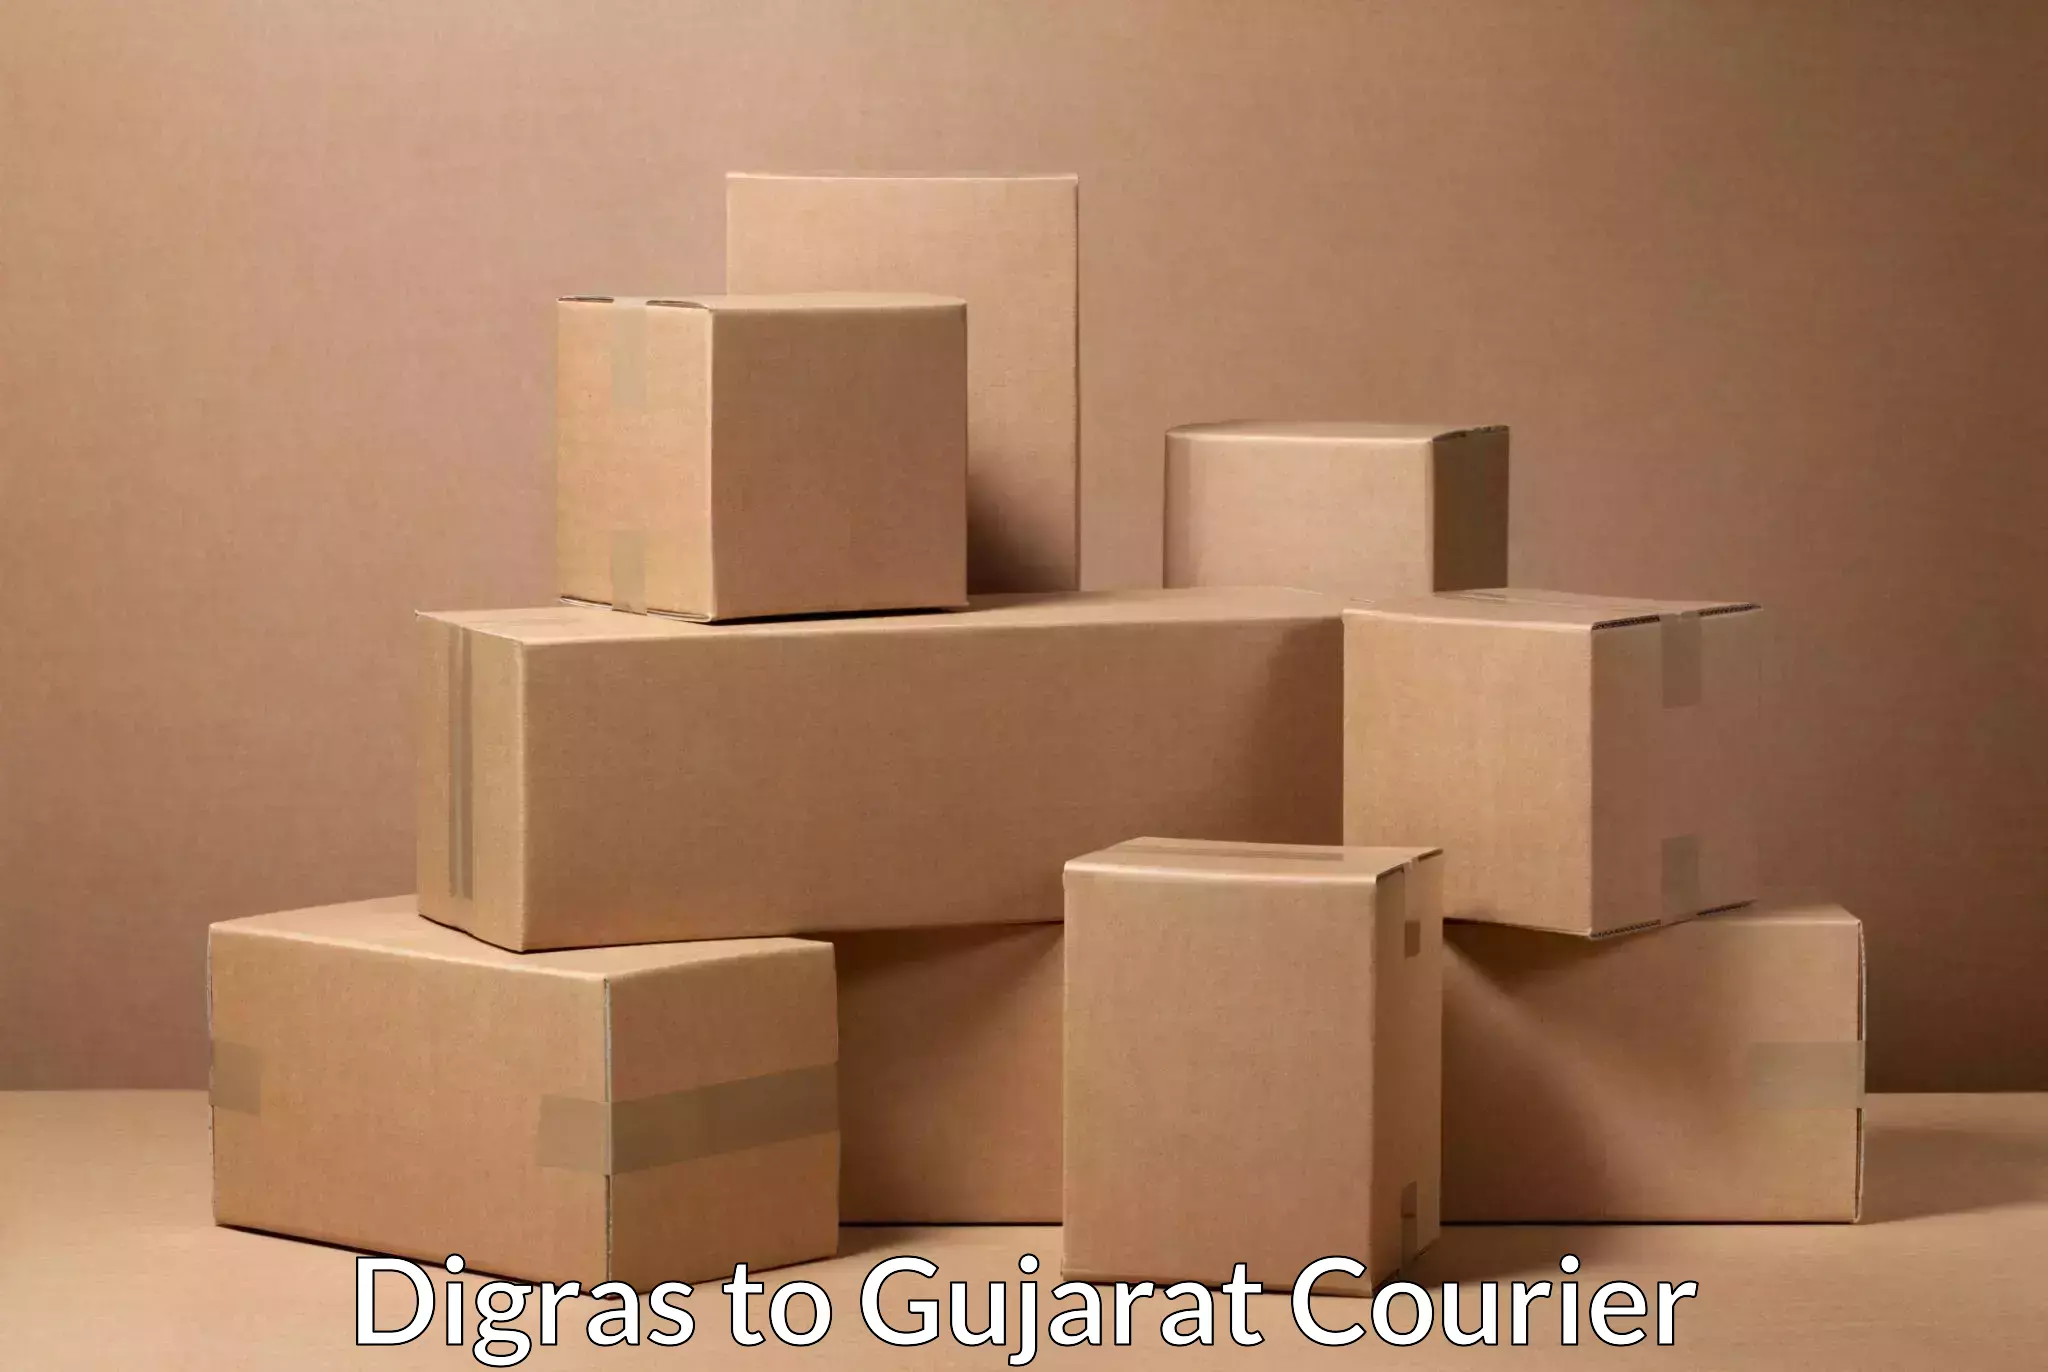 User-friendly courier app Digras to Gujarat